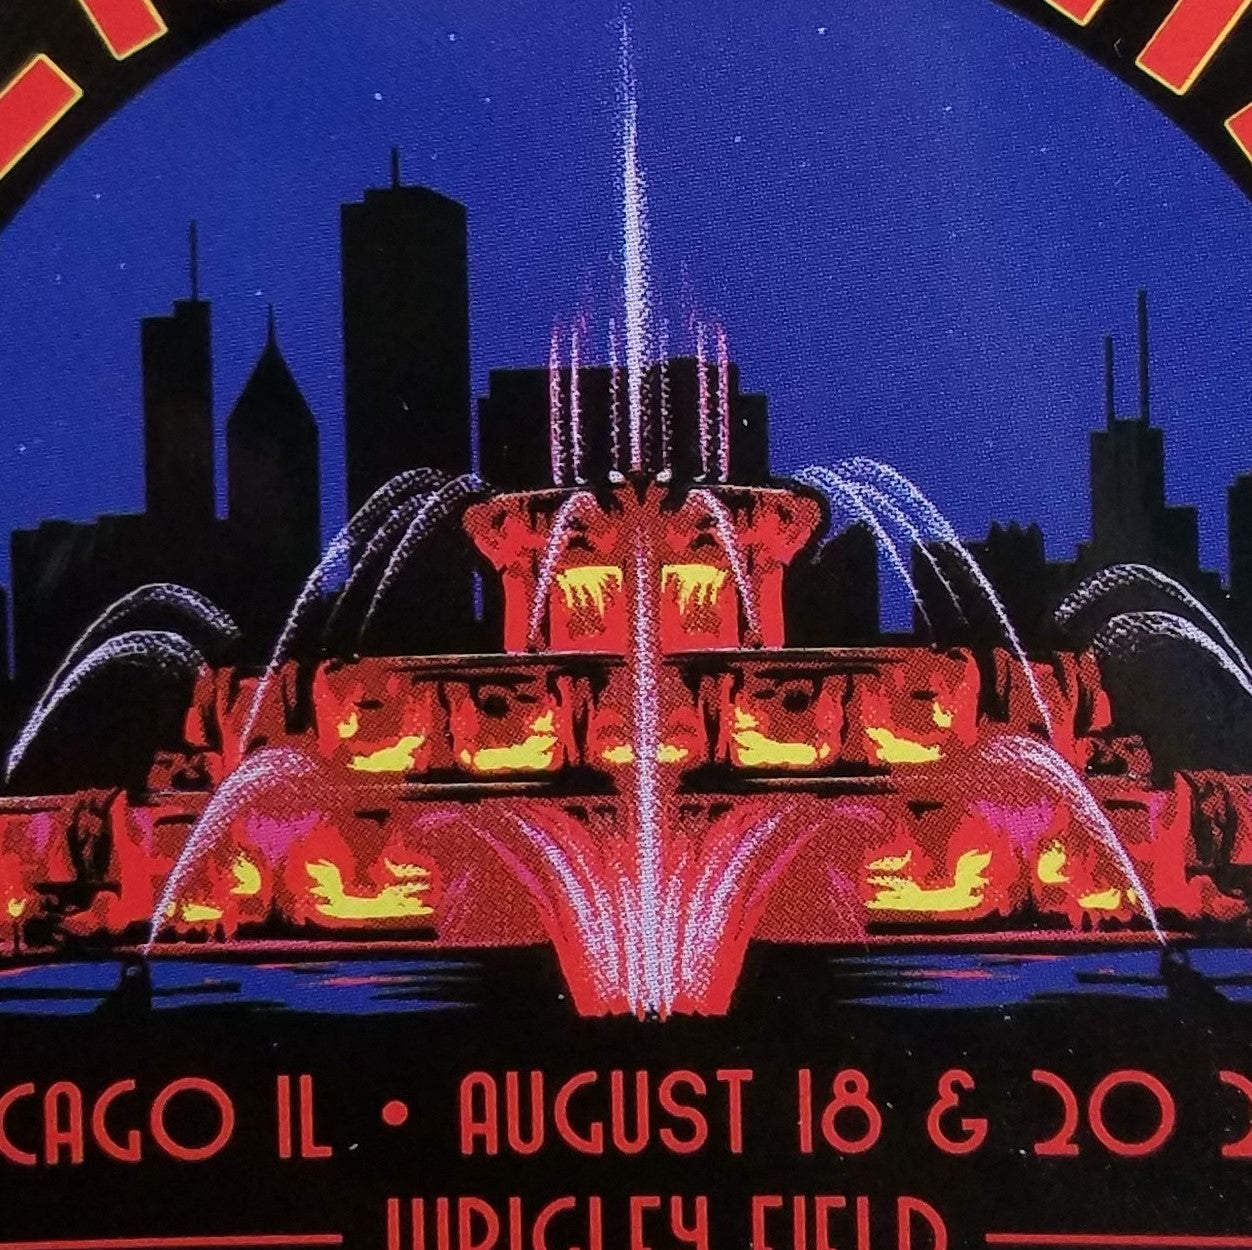 Title: Pearl Jam Wrigley Field Sticker - Buckingham Fountain Type: Sticker Size: 3.5" x 4.5" Notes: Purchased from the Pearl Jam Merch Tent outside of Wrigley field on August 16, 2018.